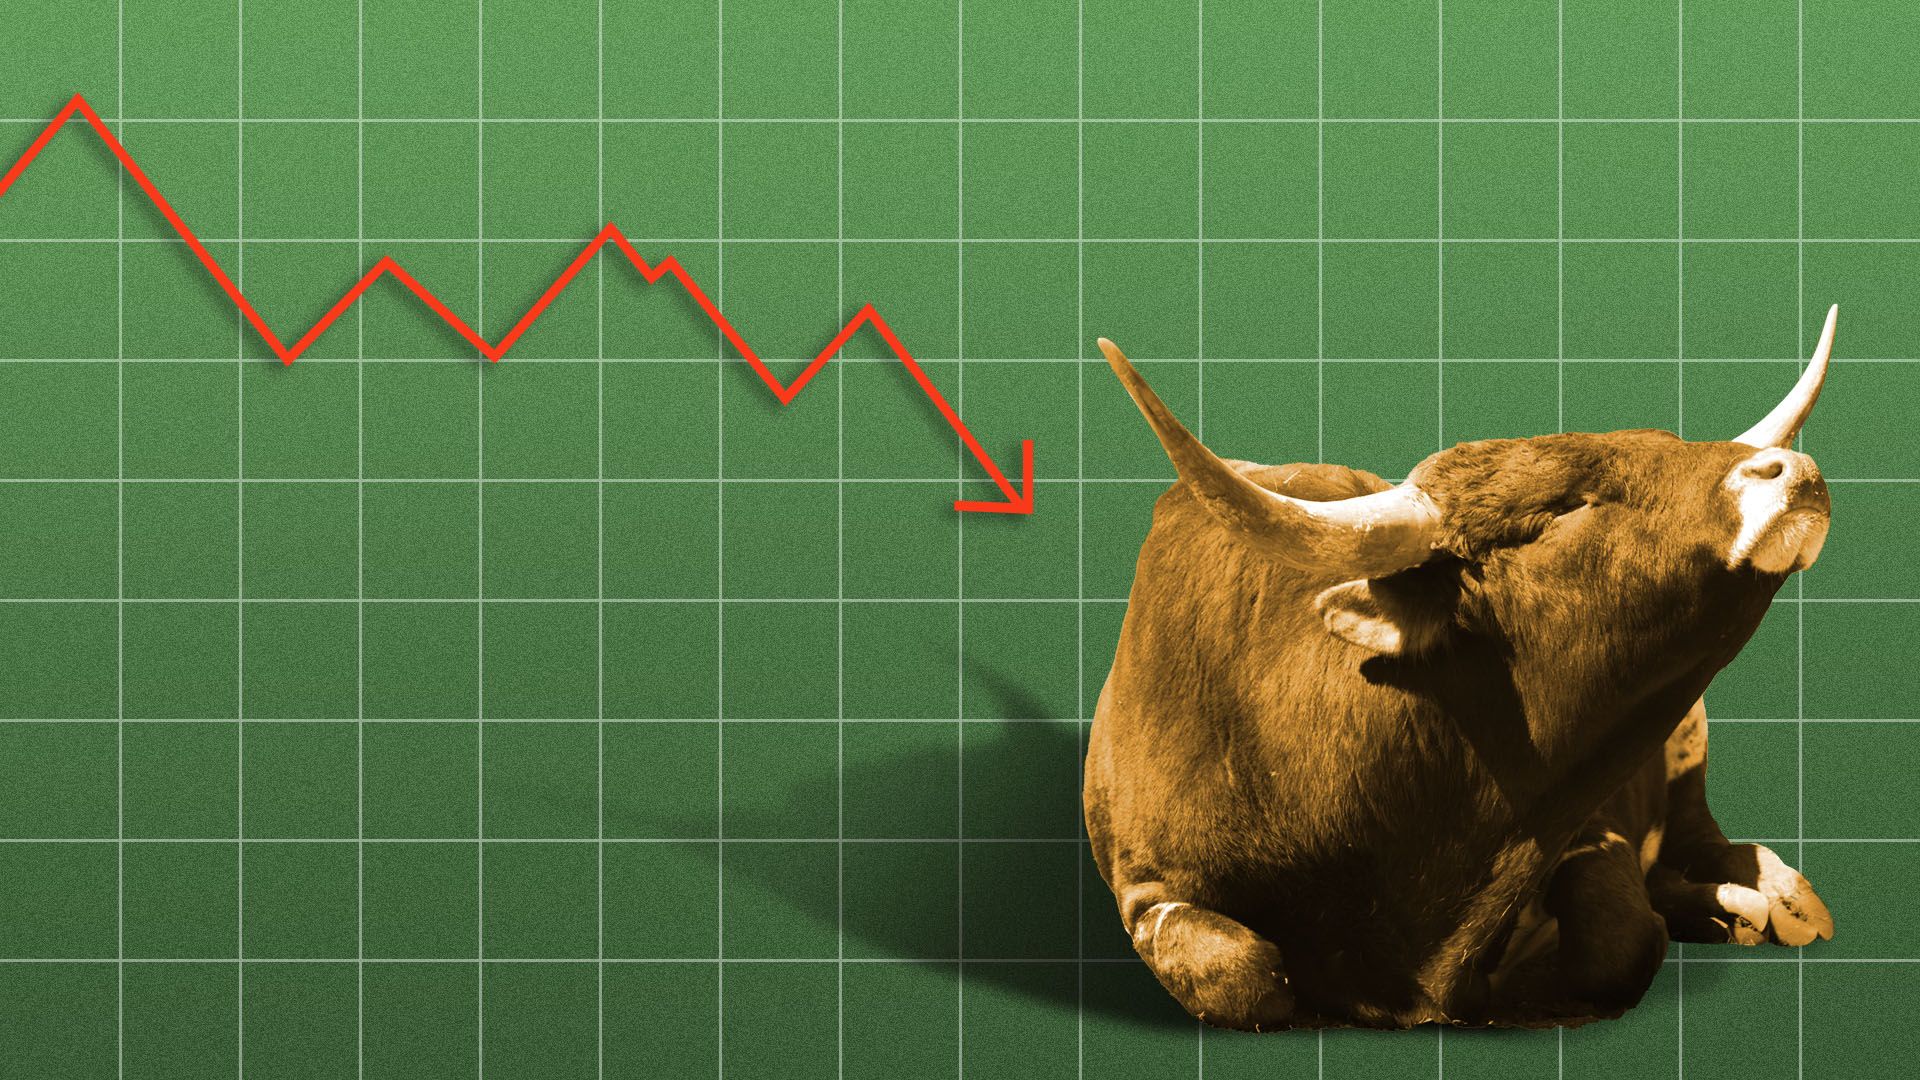 Illustration of a bull ignoring a downward trend line on a chart